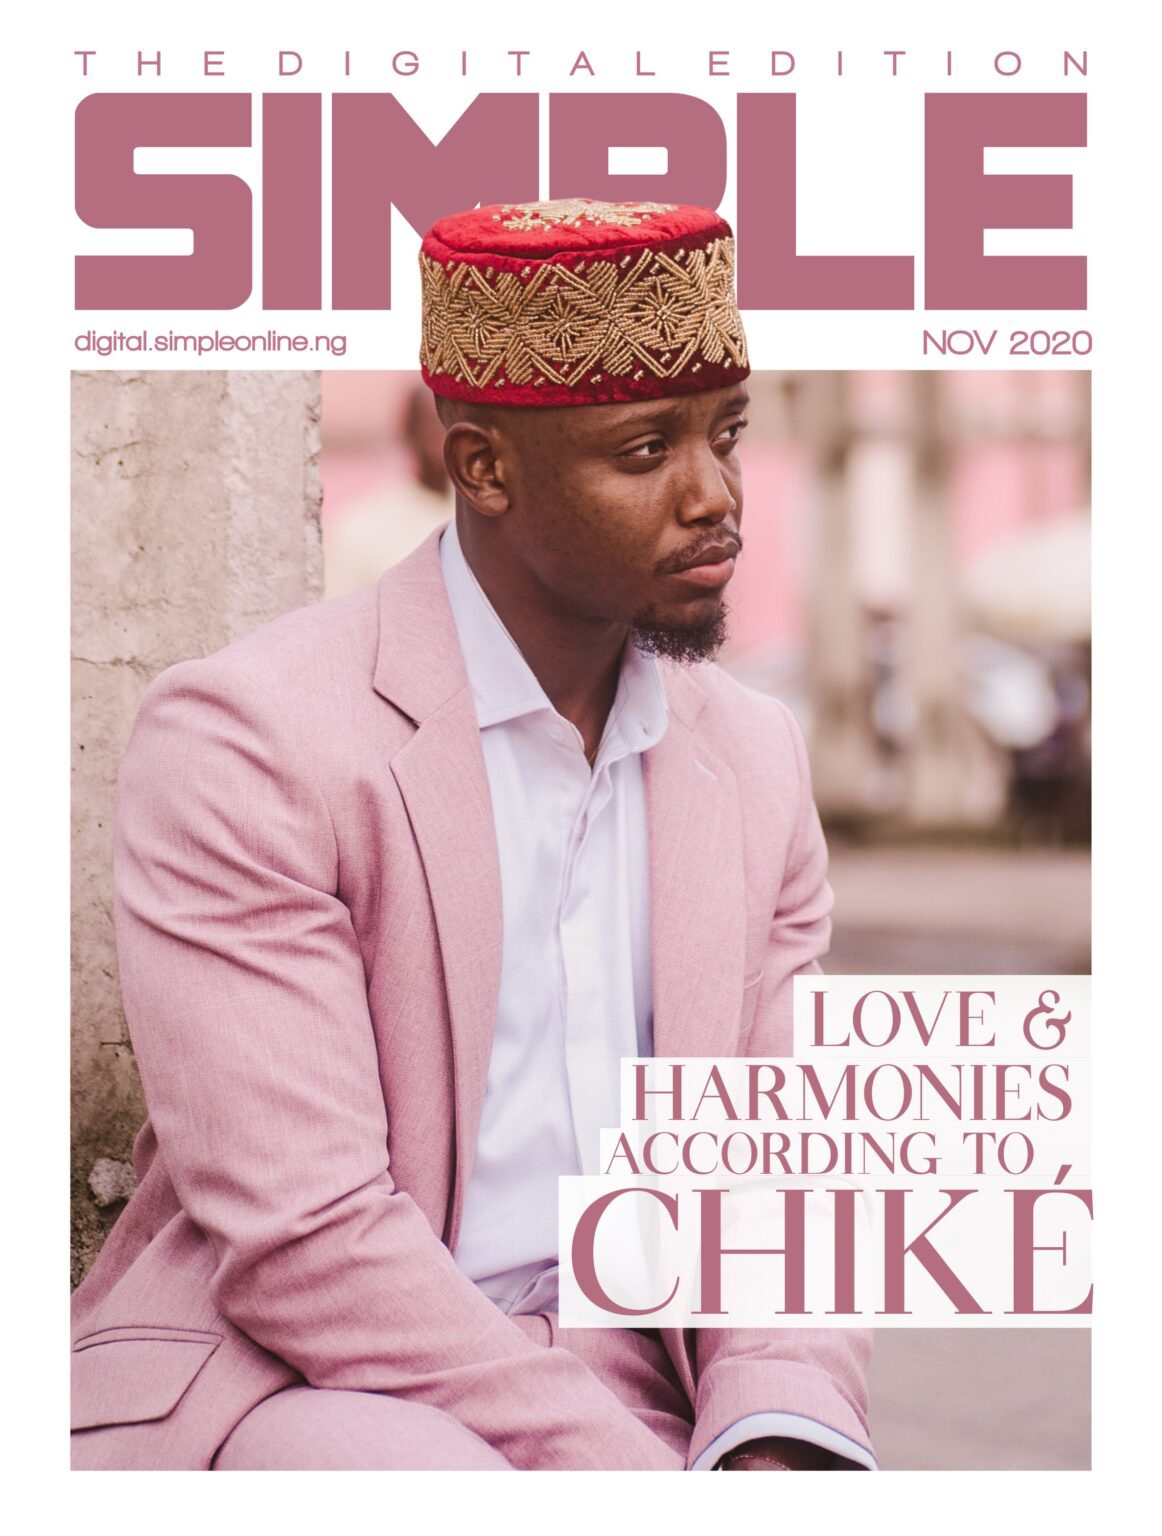 CHIKÉ SHARES HIS HARMONIES IN THE NEW DIGITAL ISSUE OF SIMPLE MAGAZINE